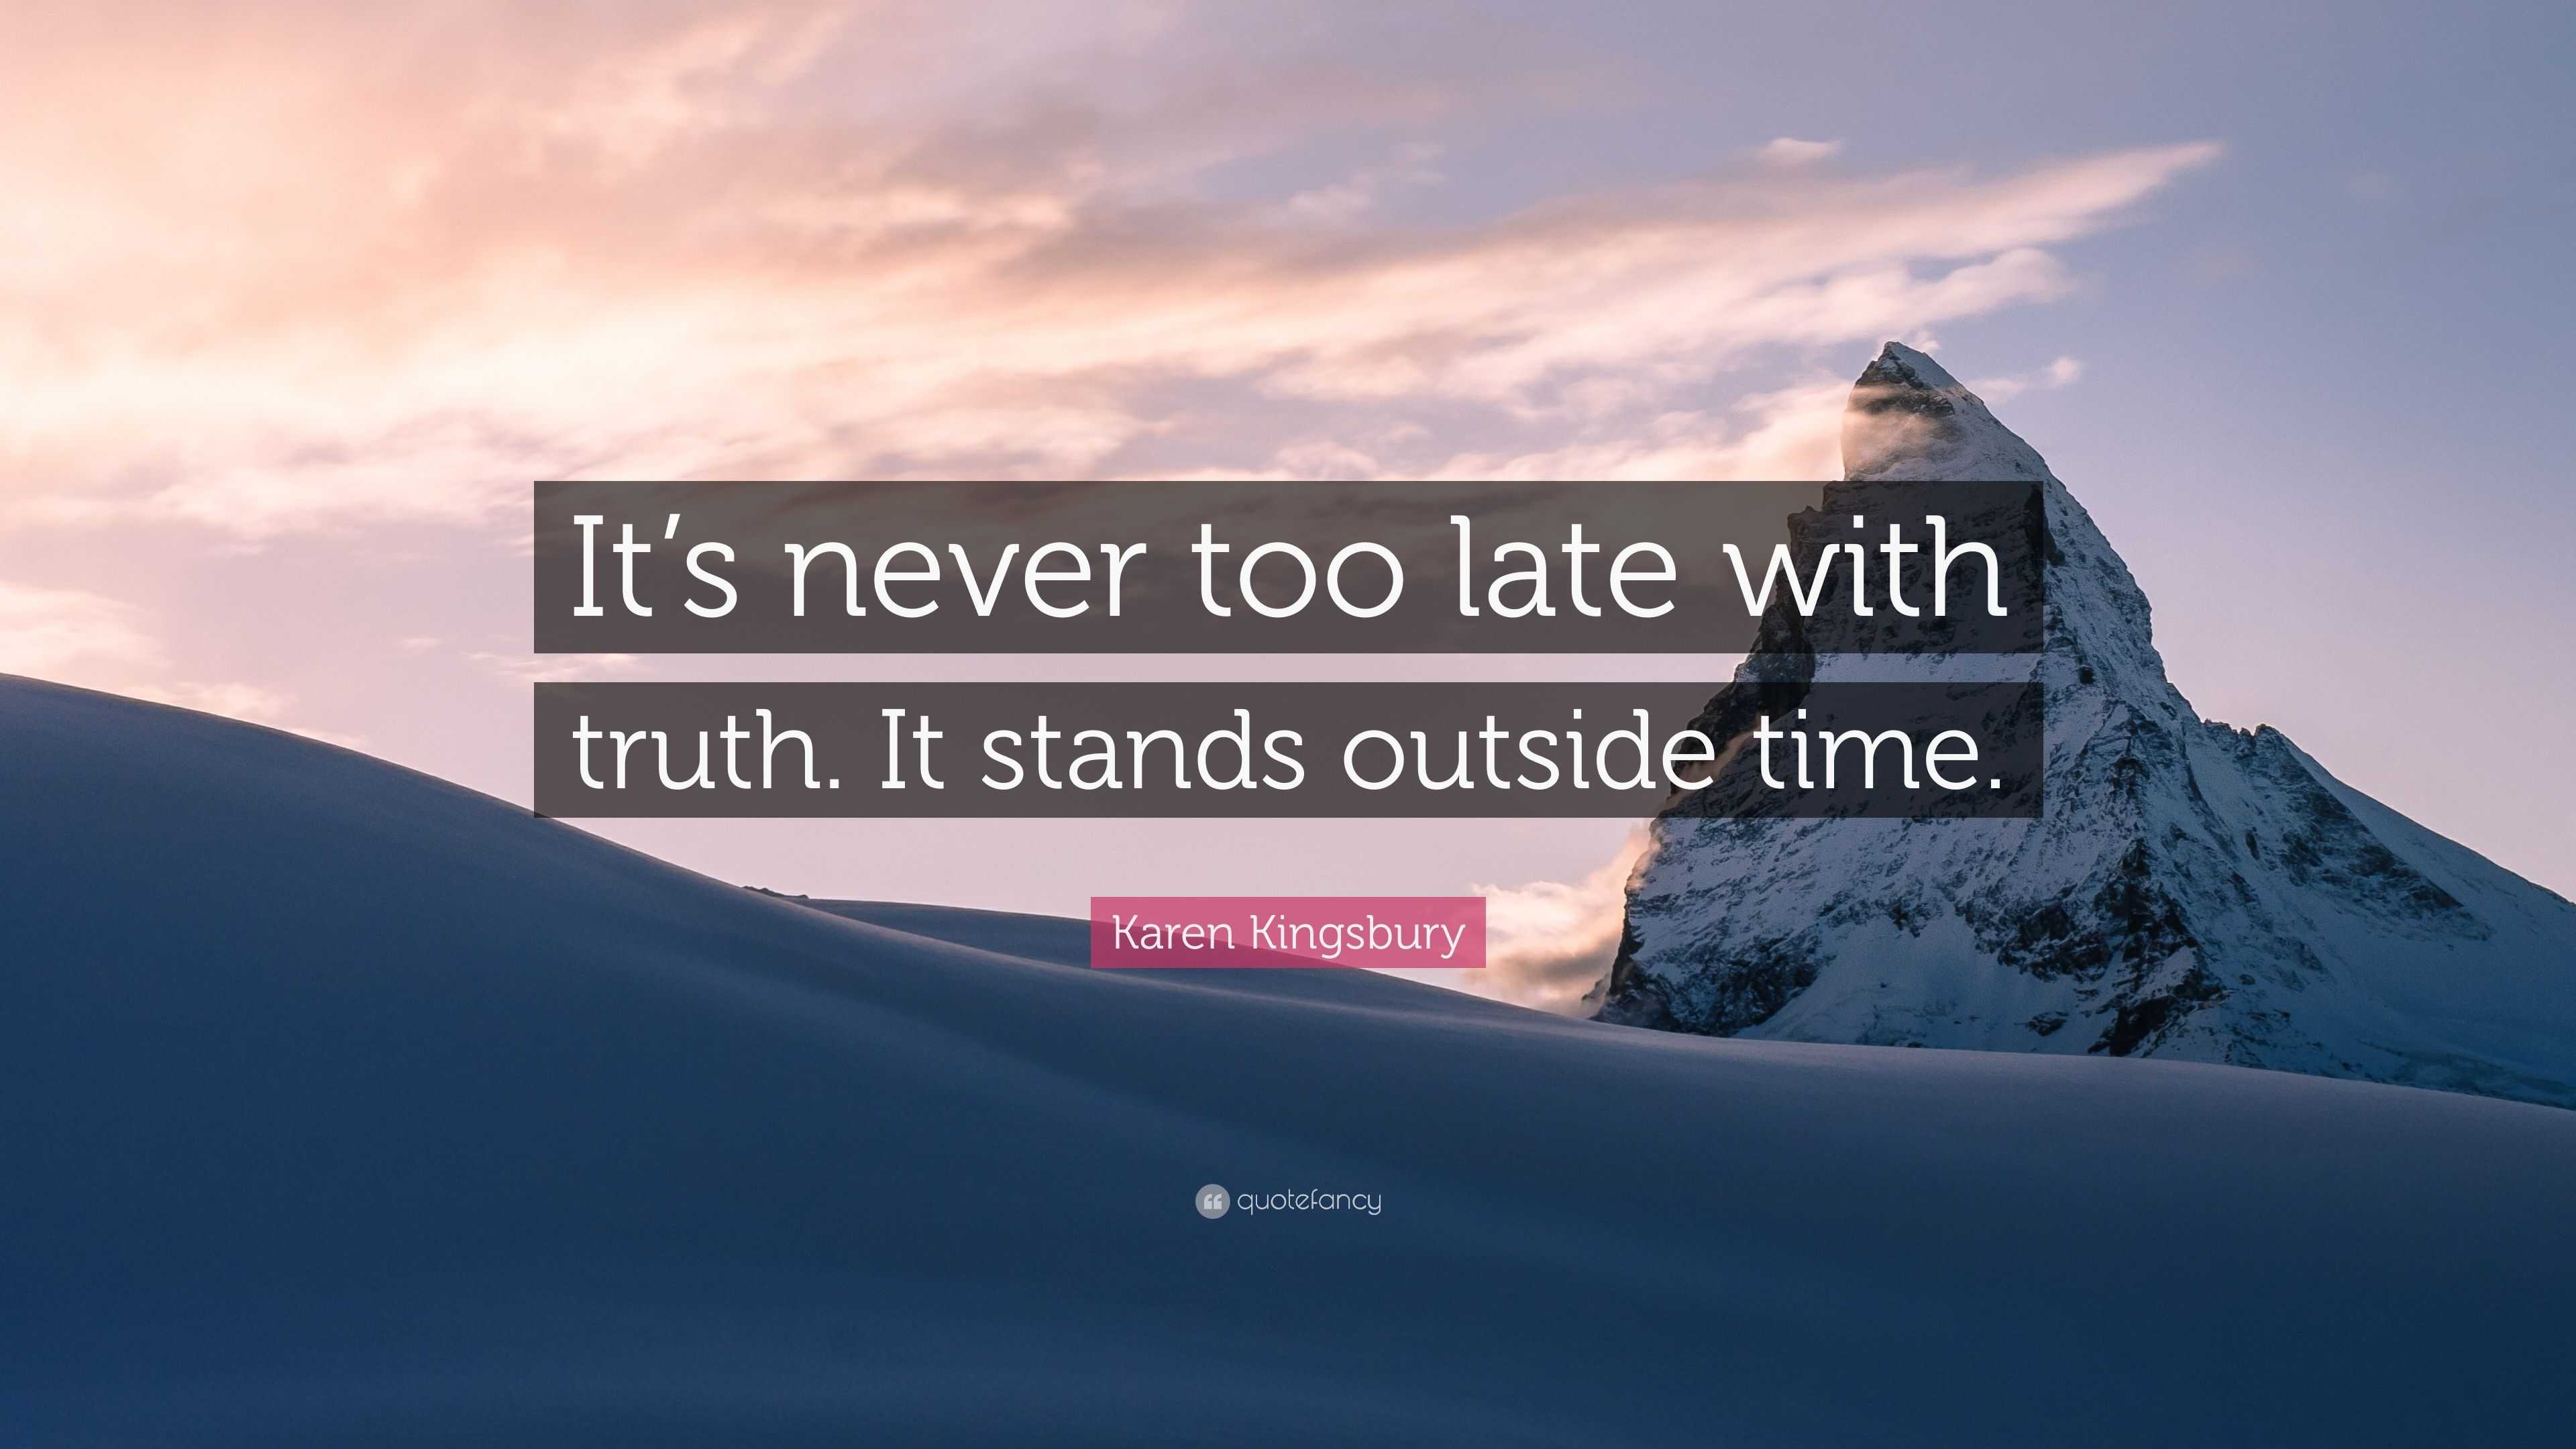 Karen Kingsbury Quote: “It's never too late with truth. It stands outside  time.”